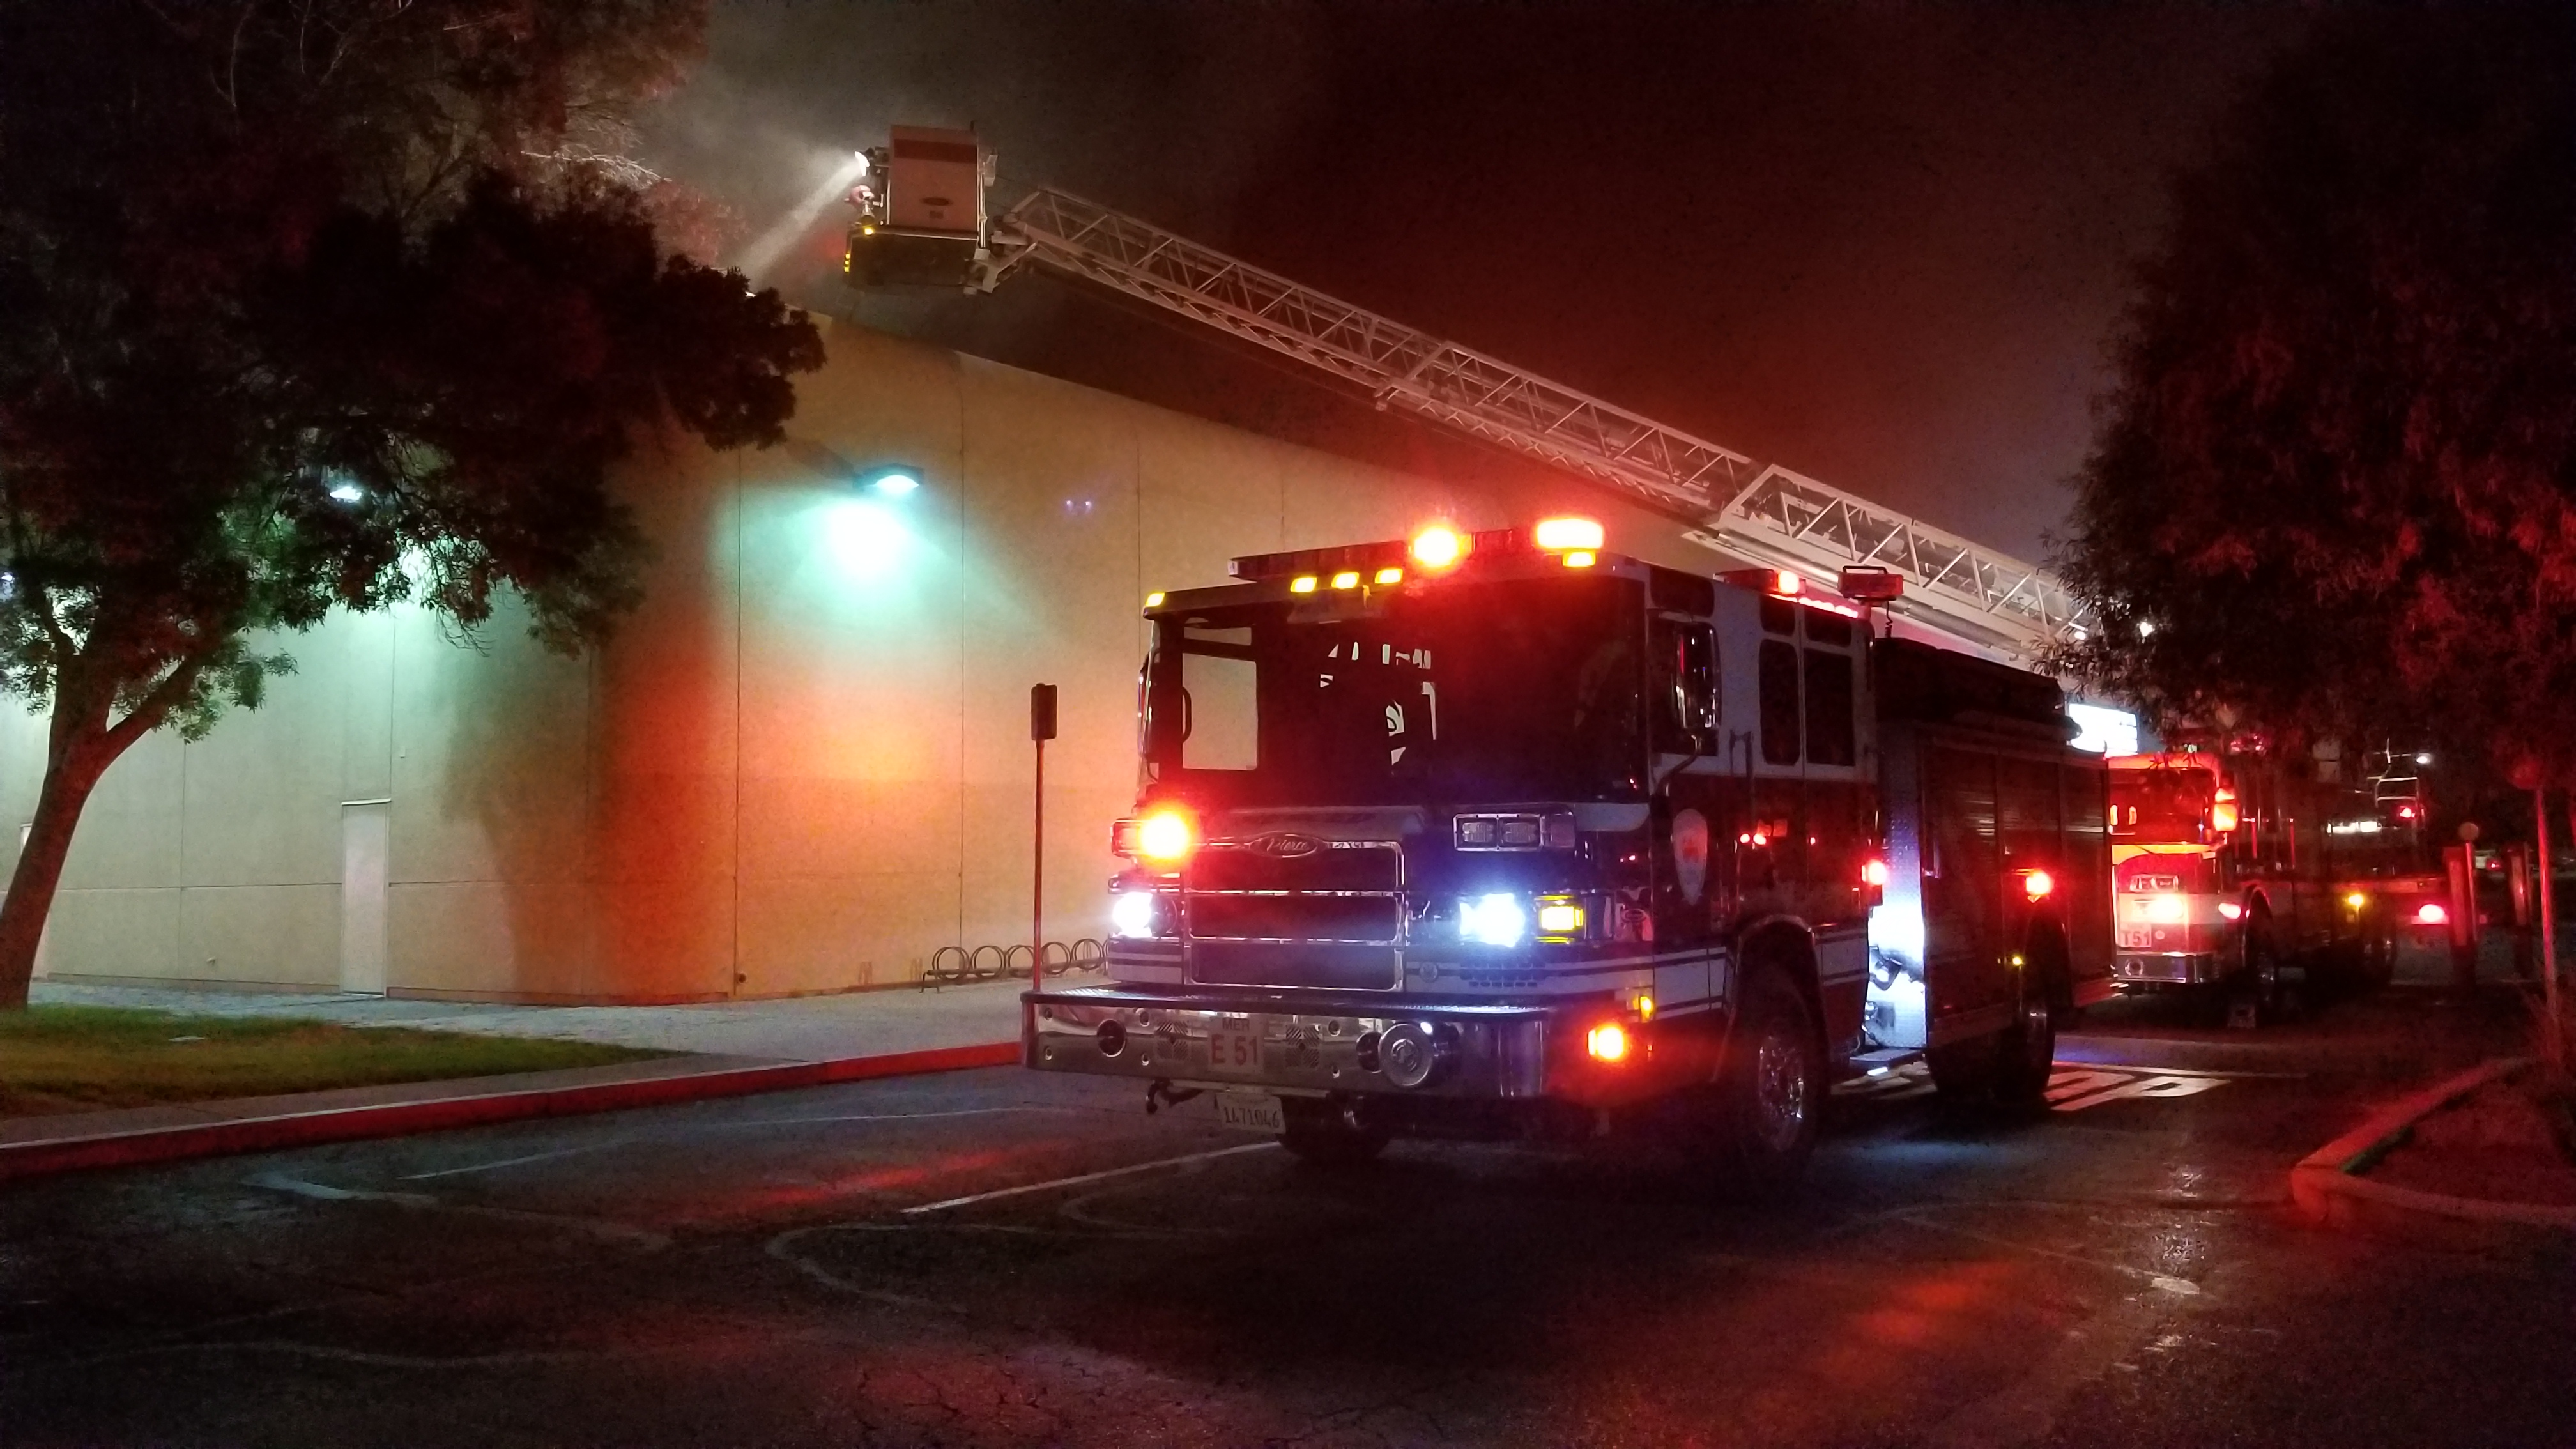 This is what happened to the Merced theater that caught on fire